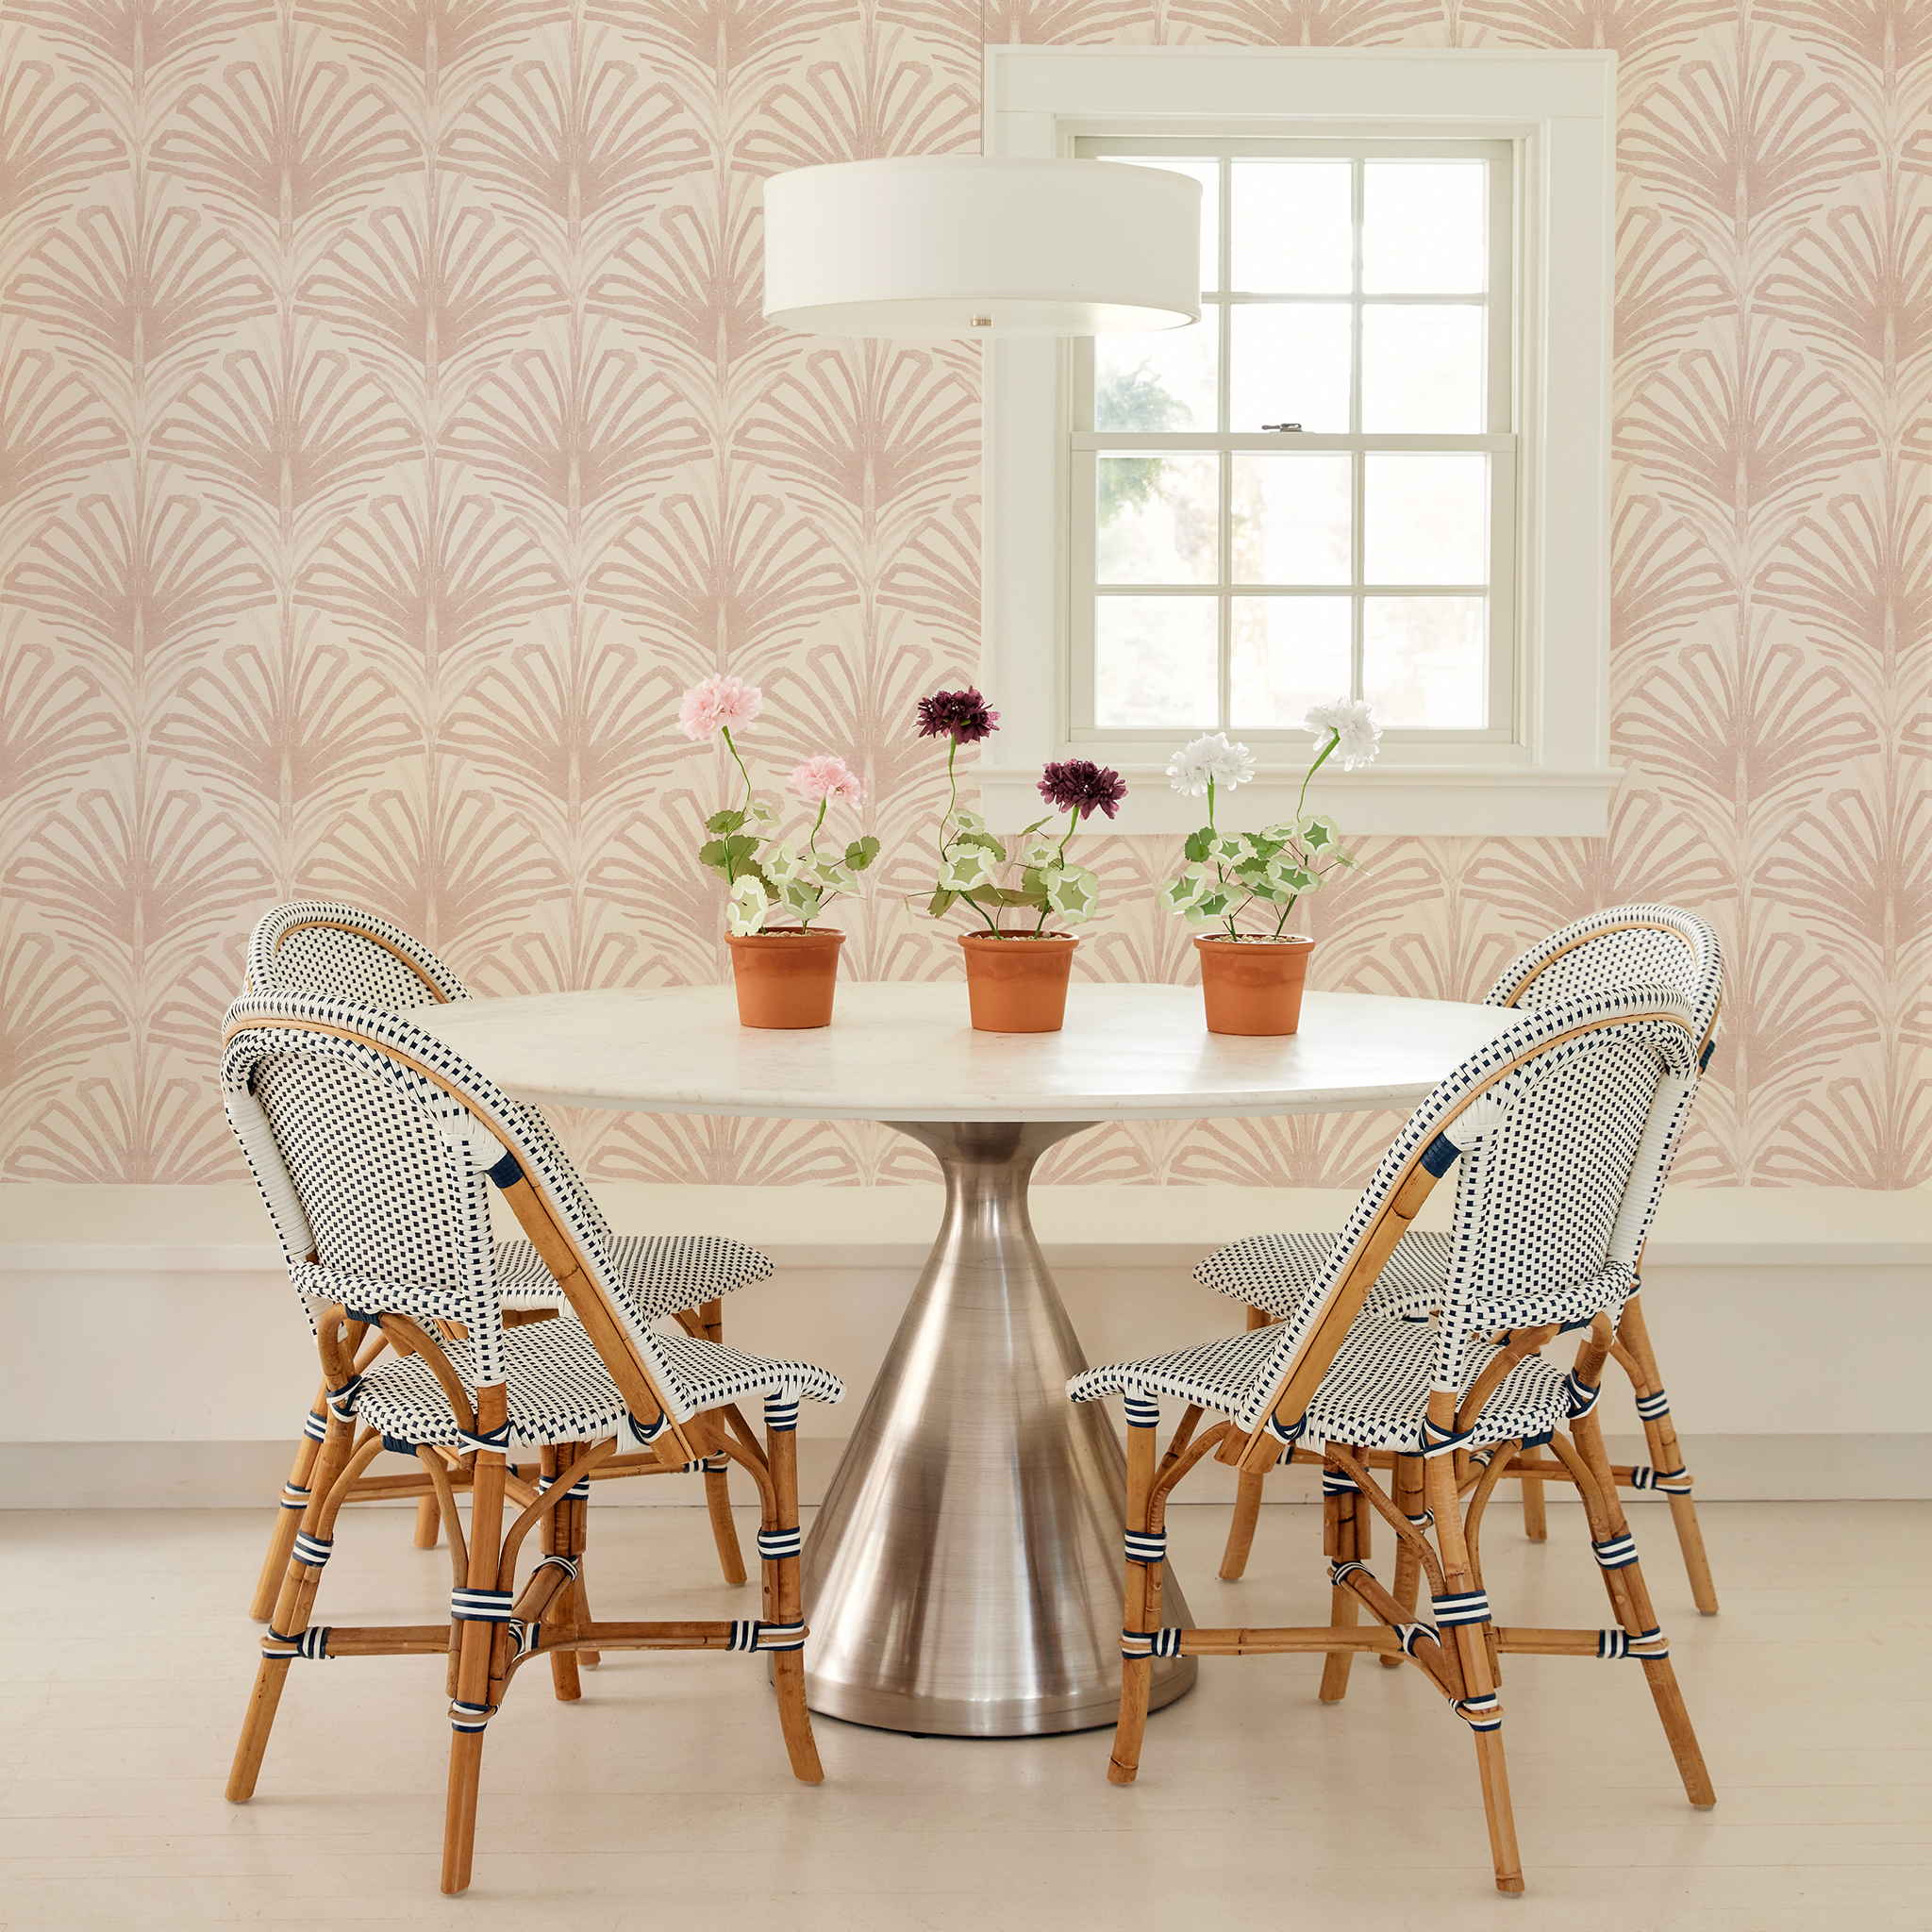 Circular table with flowers on three clay pots with 4 wooden chairs around it next to an illuminated window styled with a Rose Pink Palm Printed Wallpaper